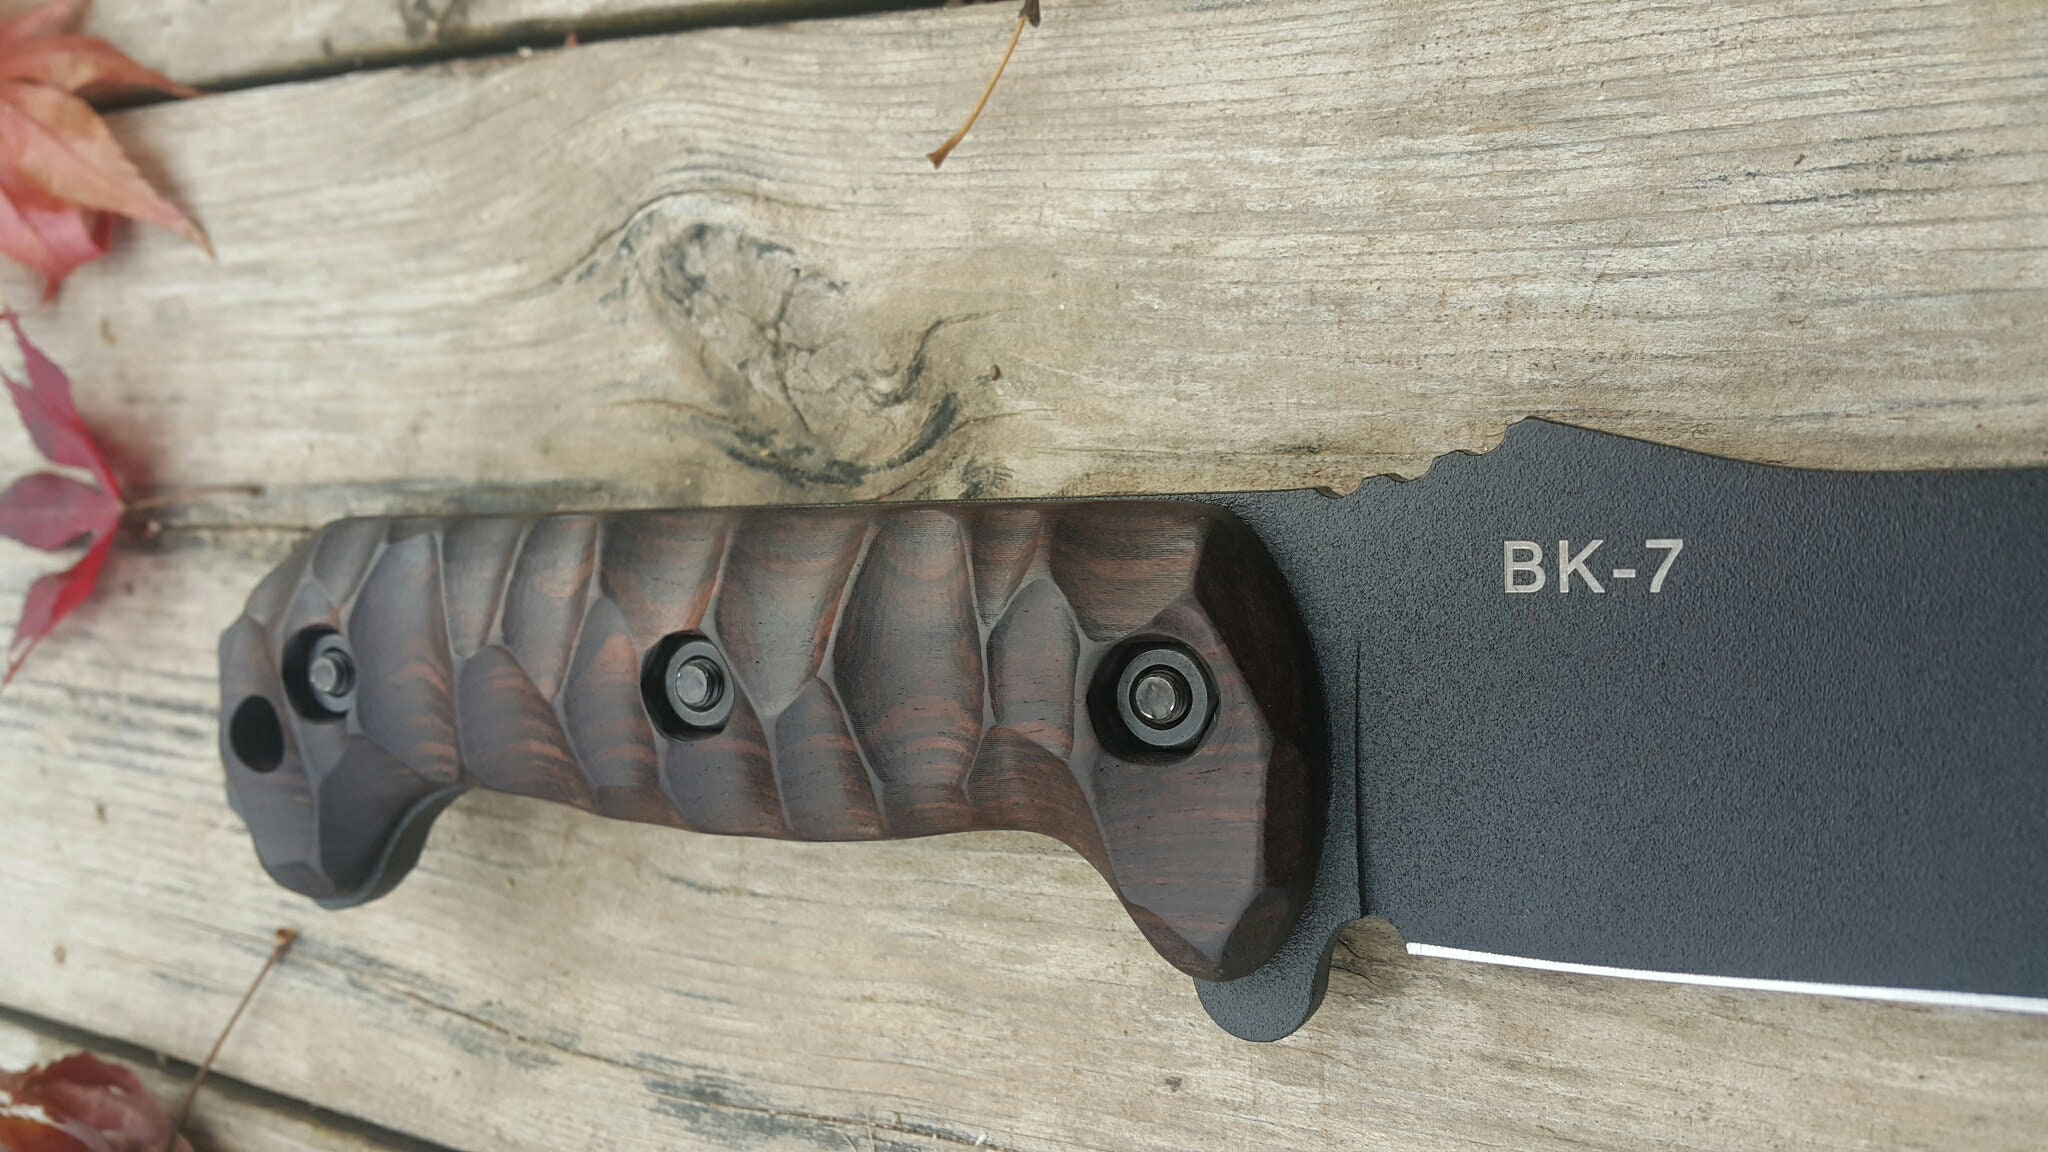 BK15 Wooden Handles/custom Scales for Bk15/bk16/bk17/wooden Knife Handle  Scales /becker Bk15 Mod/free Shipping in USA 